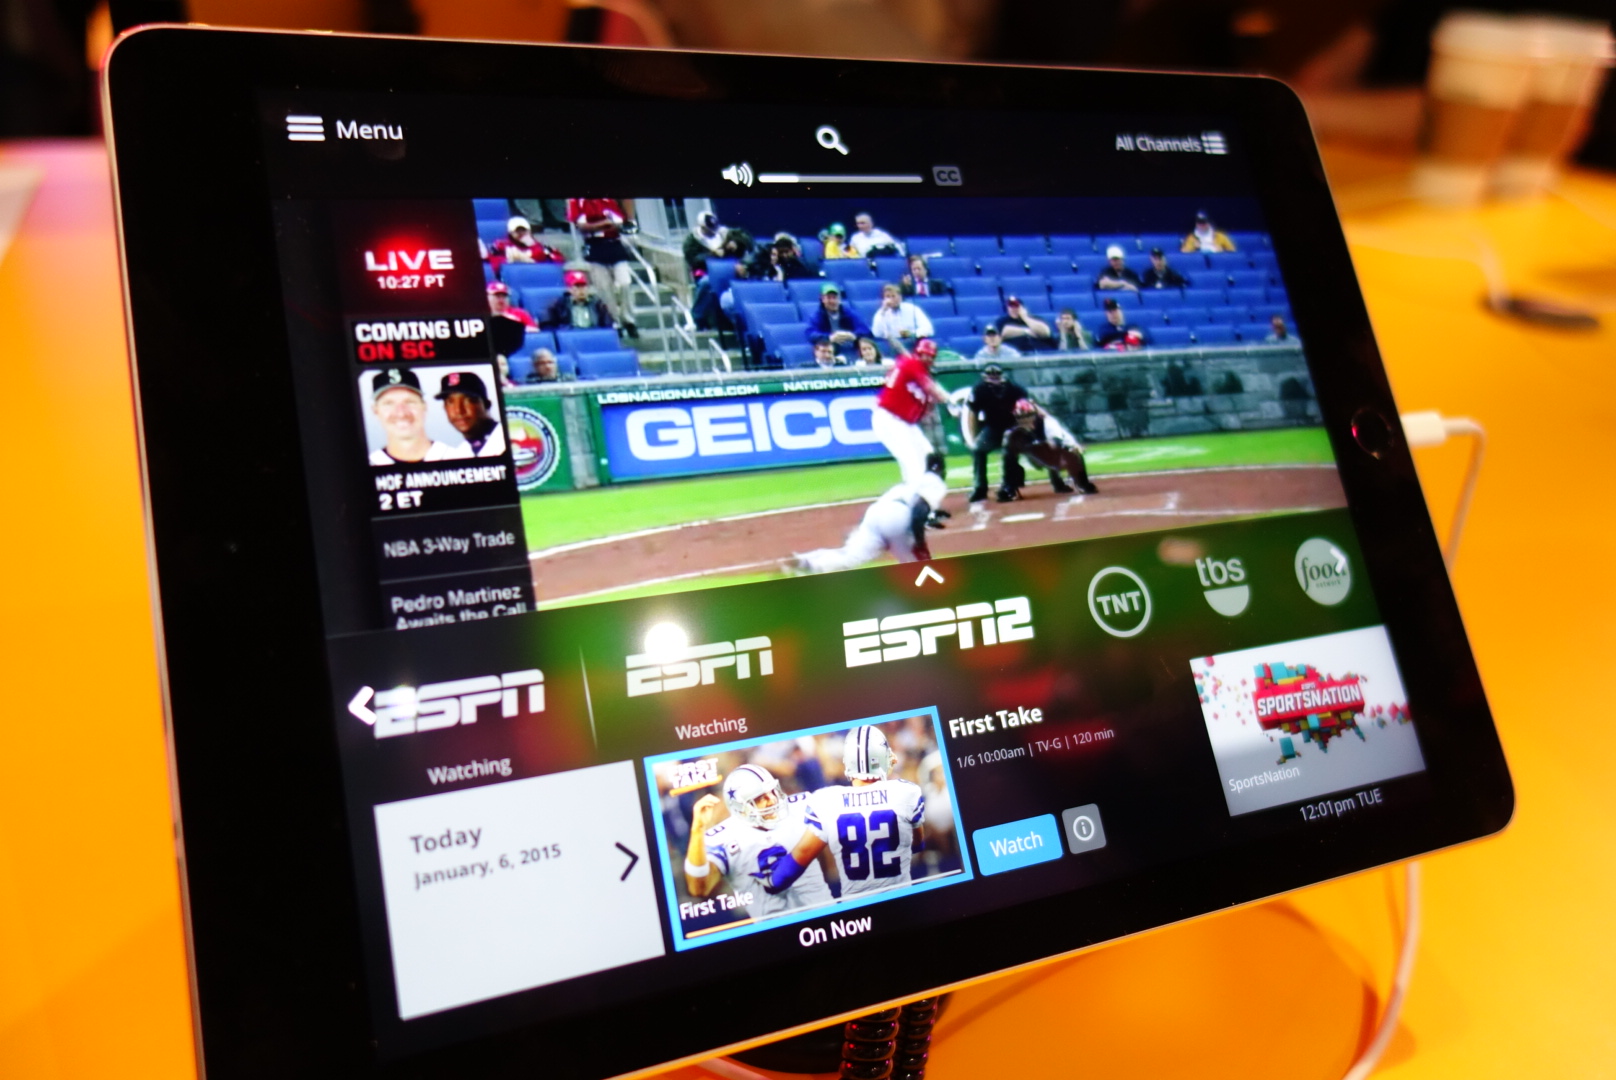 Dish’s Sling TV Streaming Service Wins Best Of CES Award